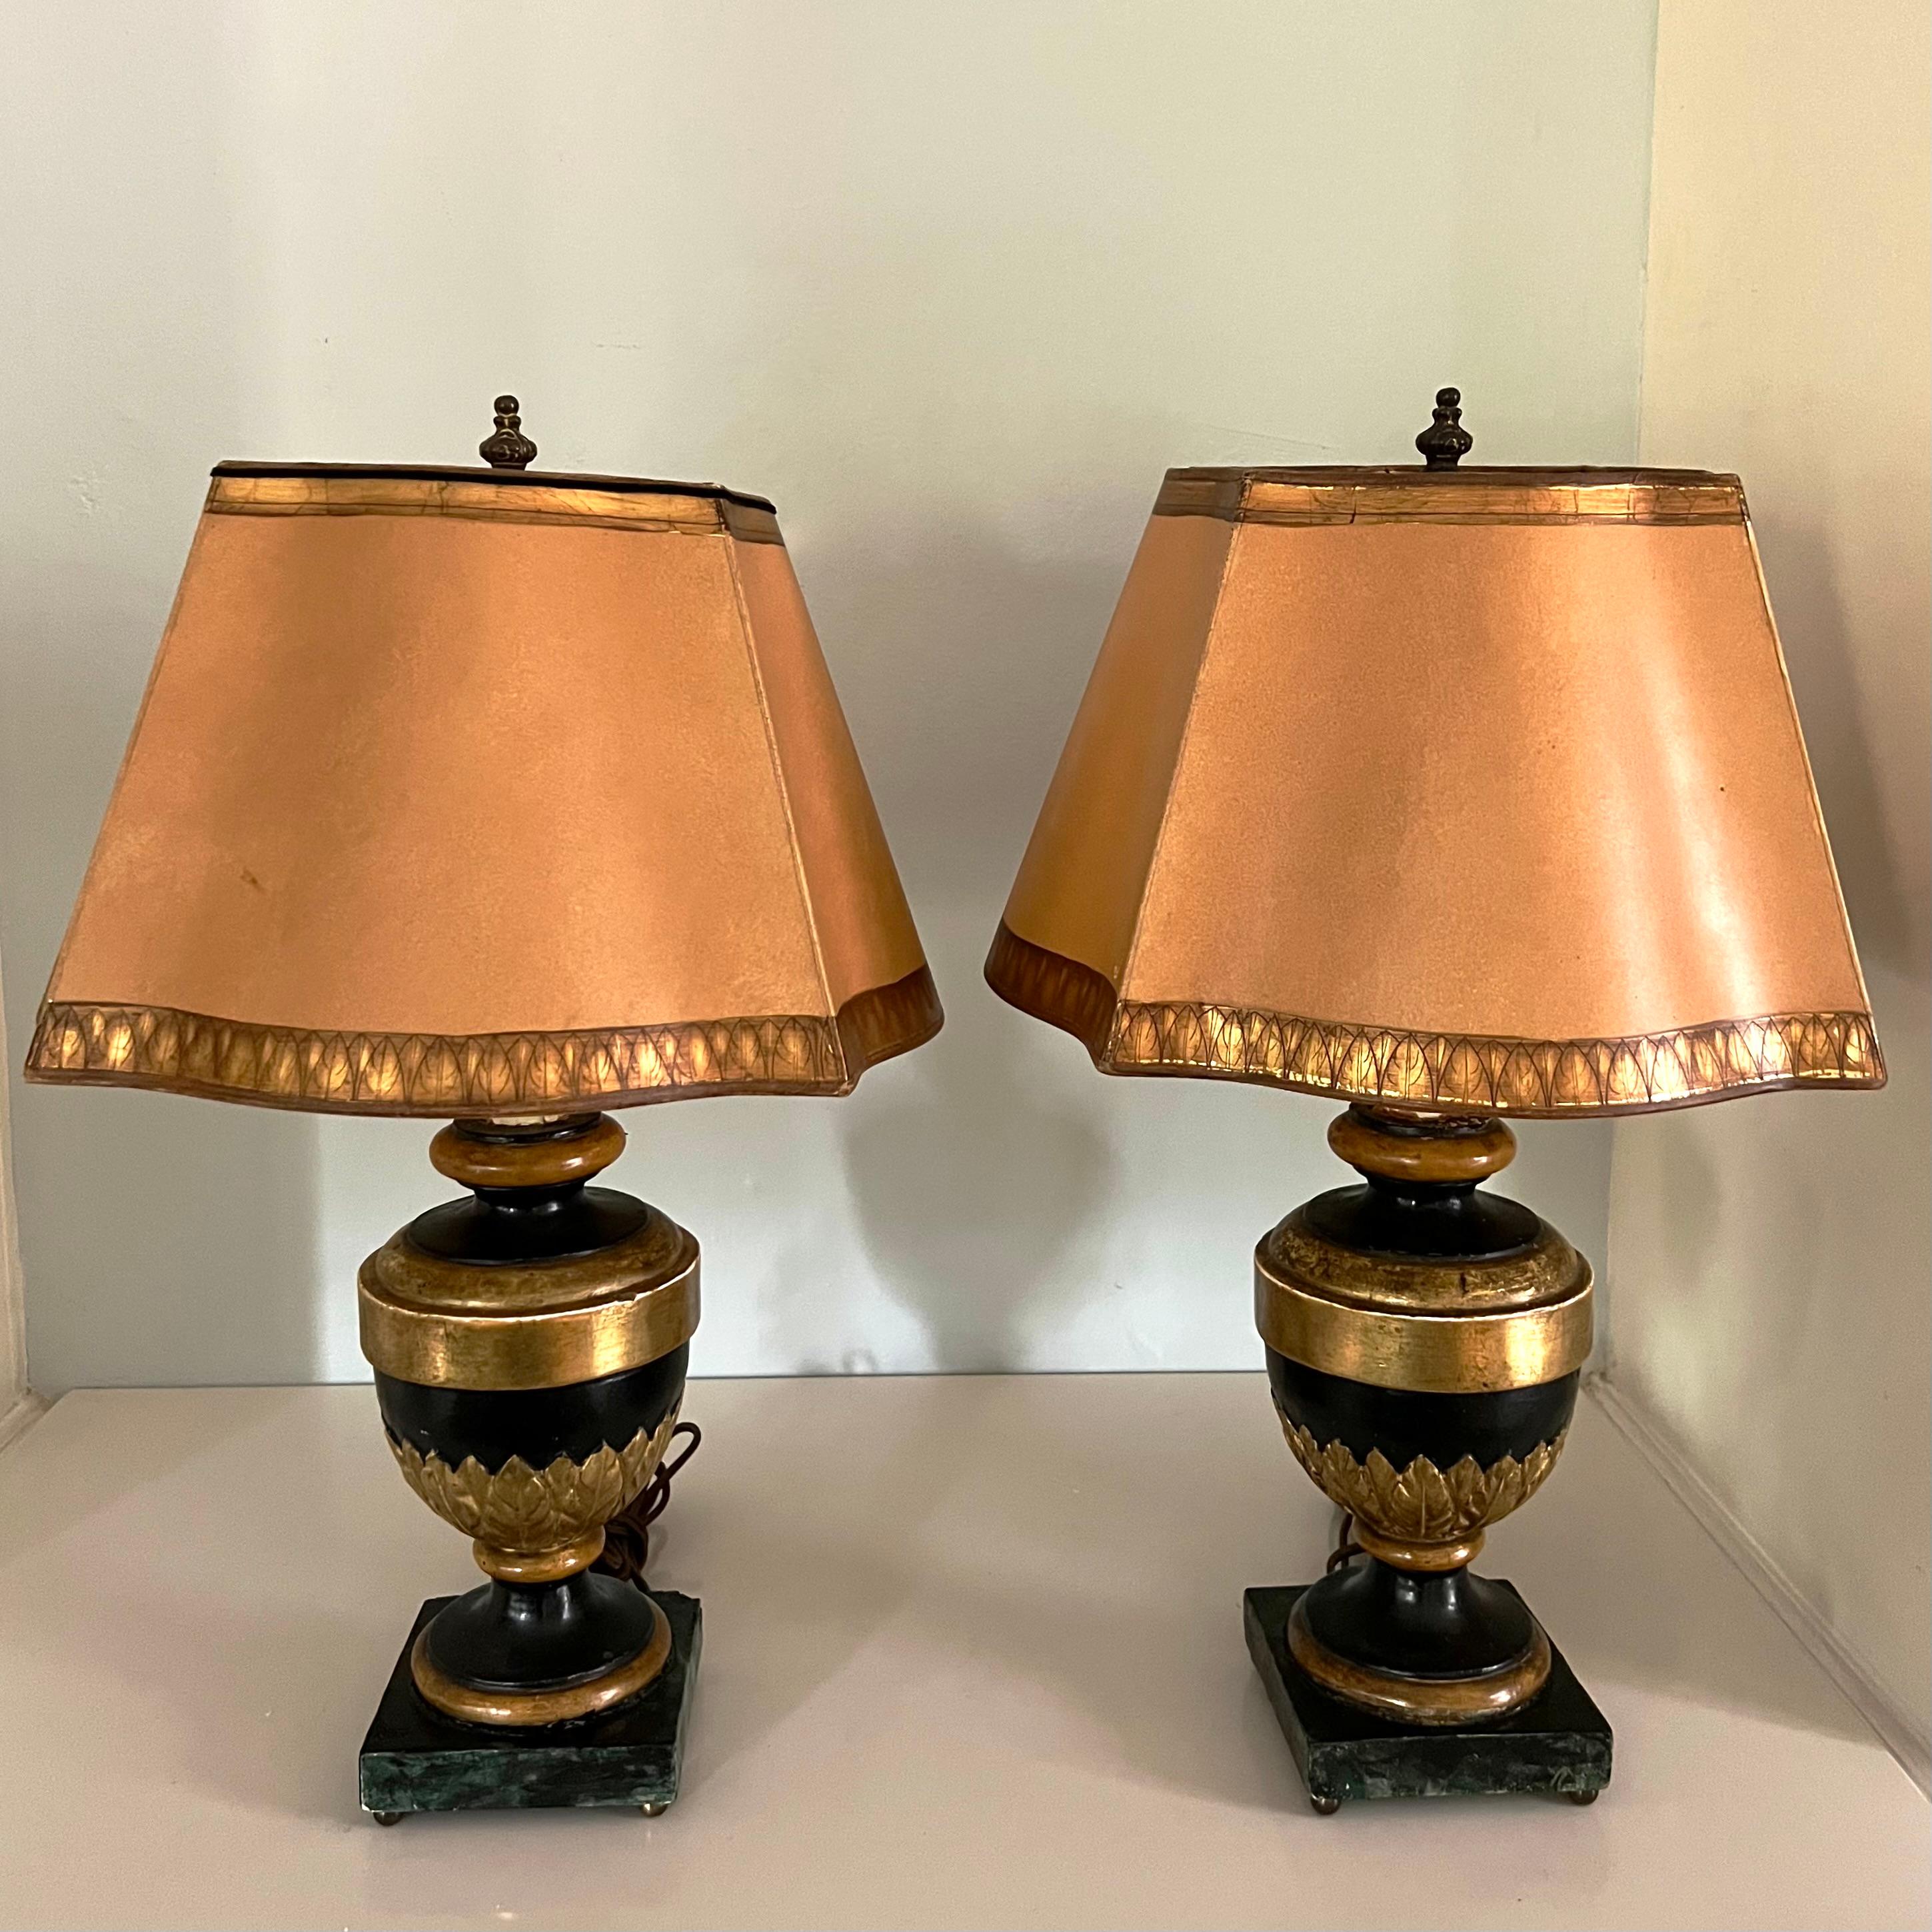 Pair of Carved Wood Gilt and Faux Marble Base Lamps with Matching Gilt Shades For Sale 1